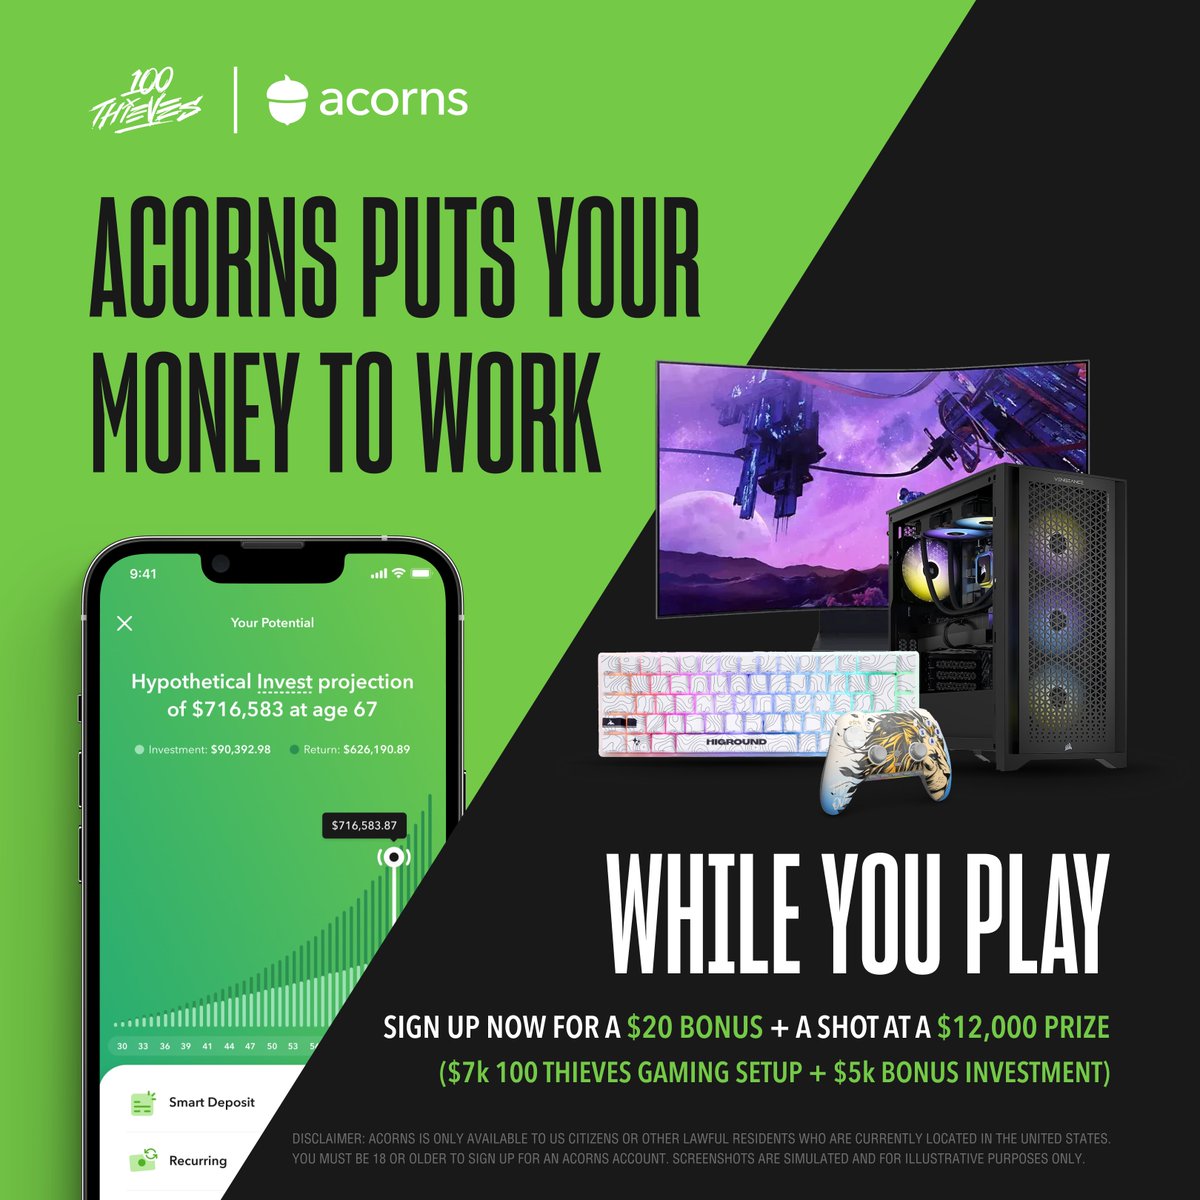 Don’t let your money just sit there — give it a chance to grow! We’re partnering with @acorns to help gamers start investing. Sign up now for a $20 bonus investment. Plus, you'll have a shot at a $7,000 gaming setup + a $5,000 investment. acorns.com/100-thieves